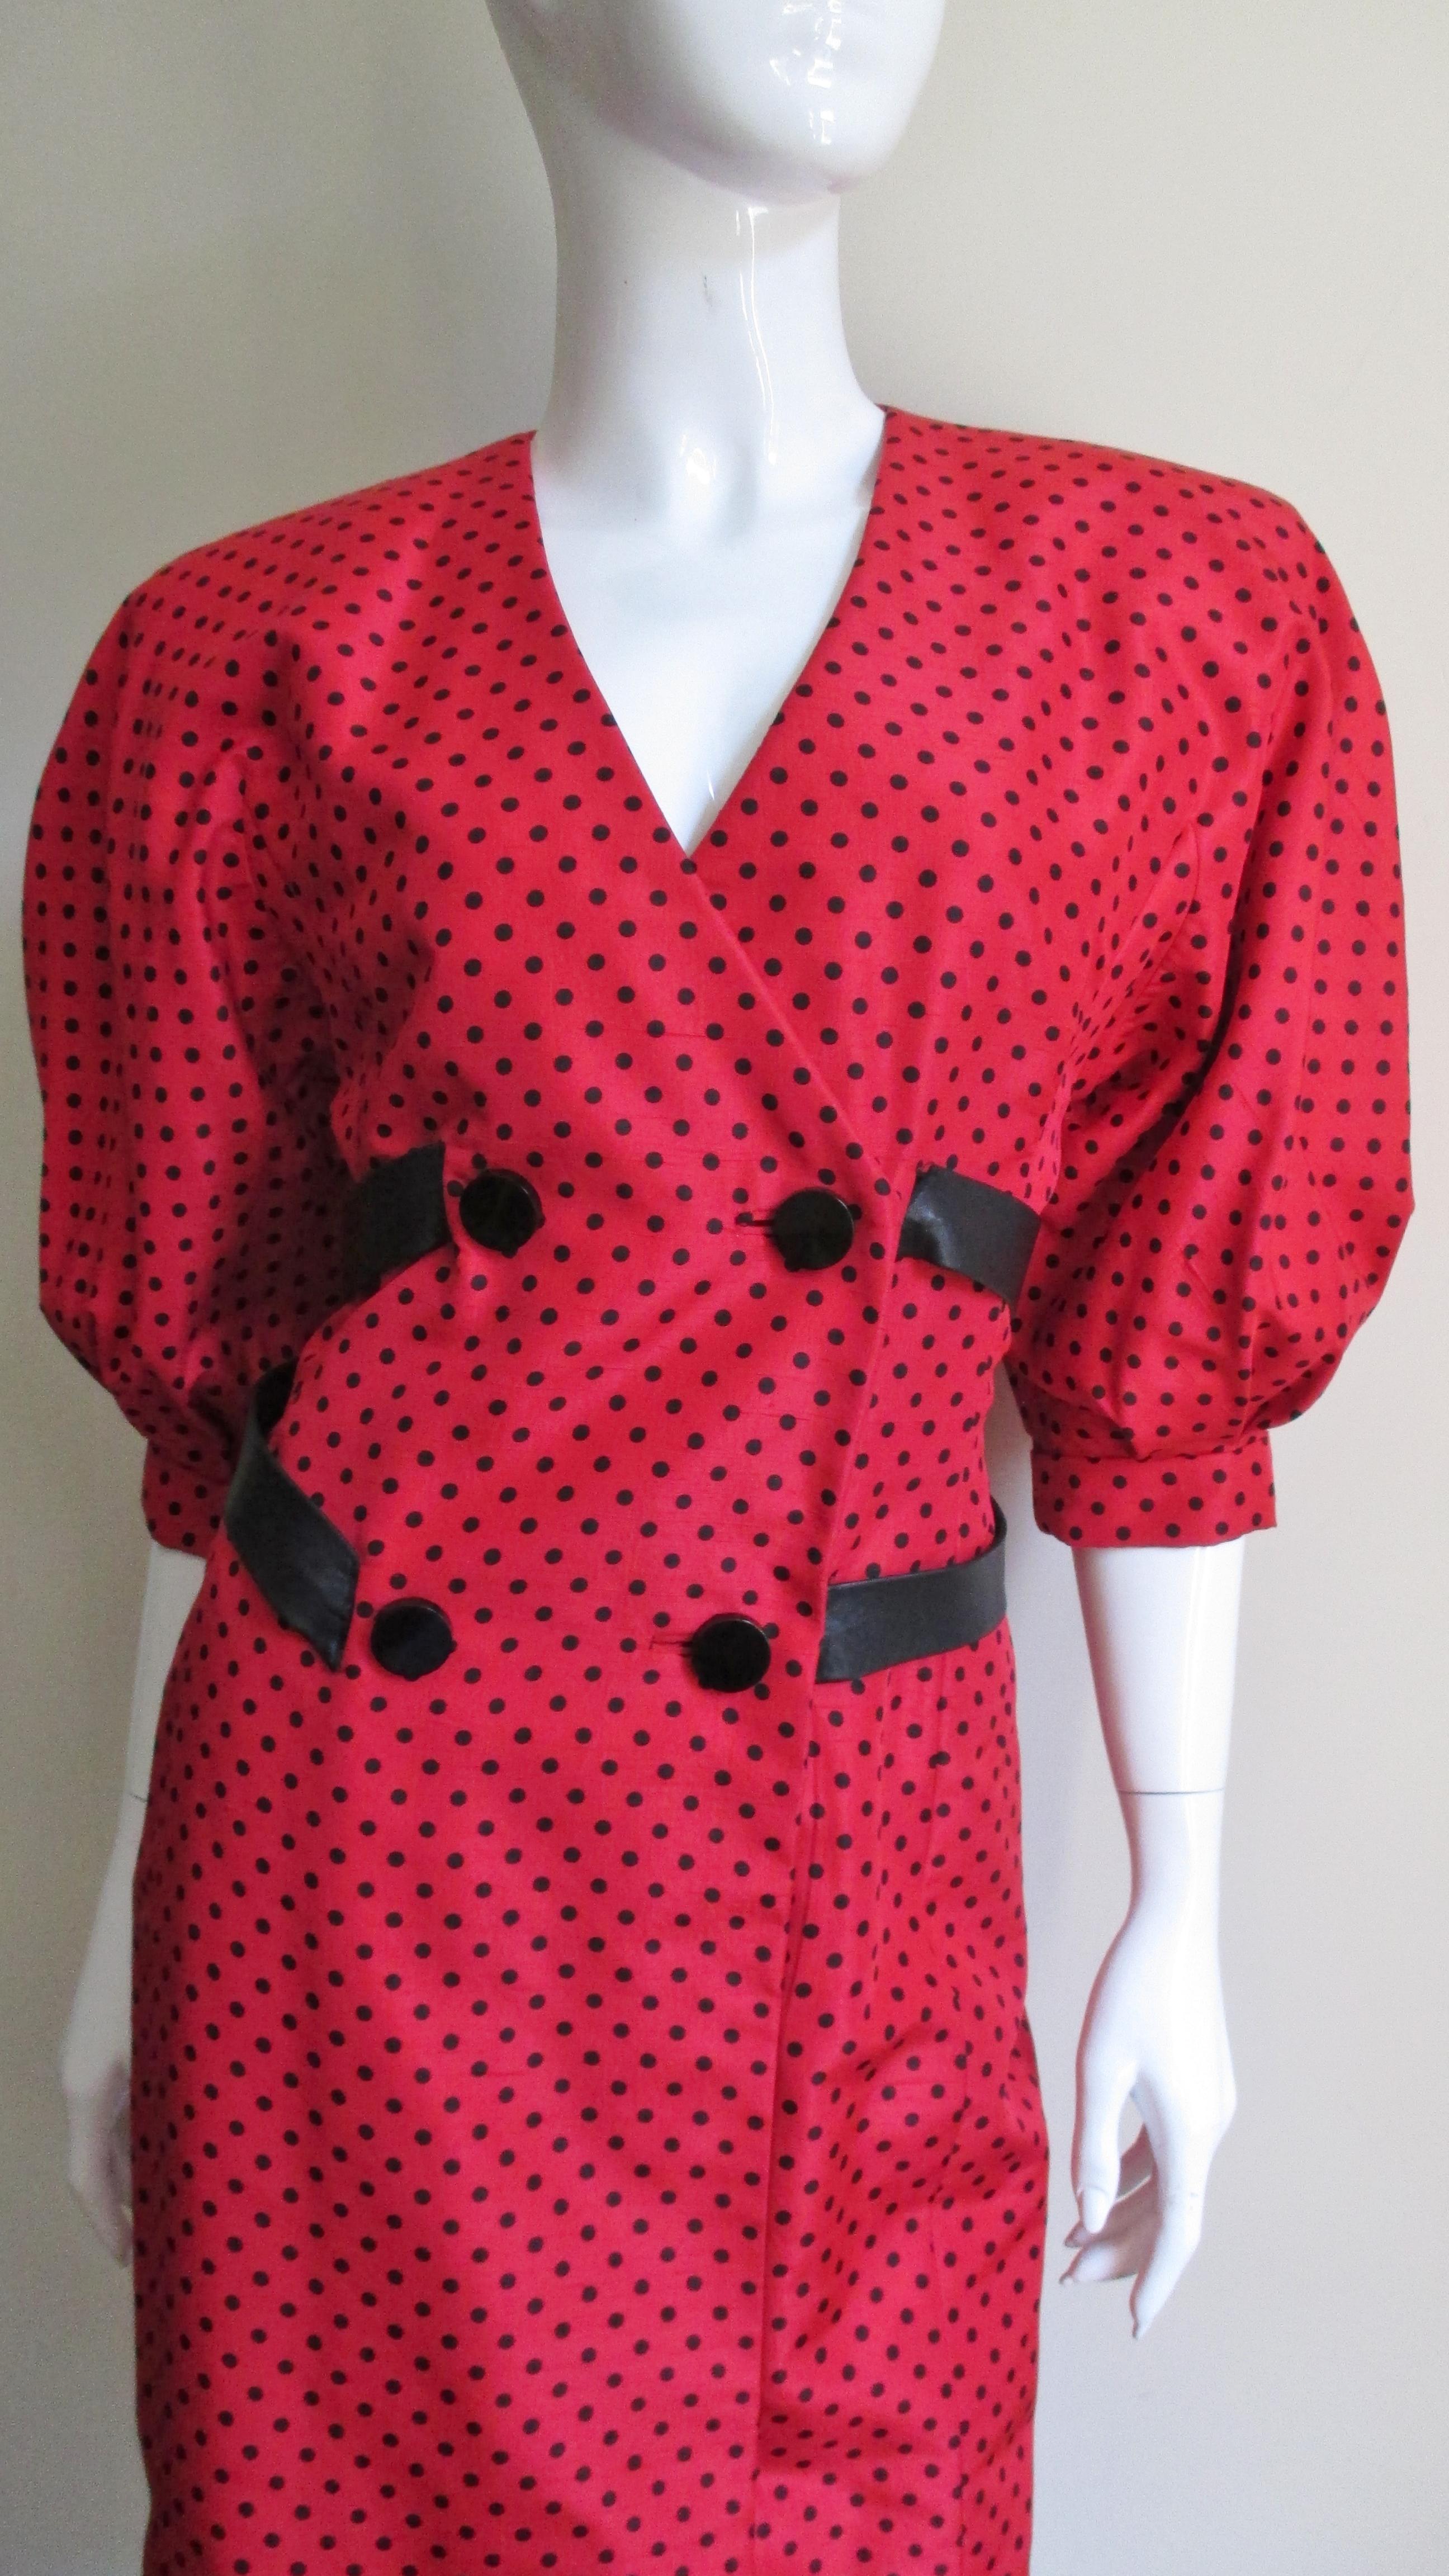 Jacqueline de Ribes Silk Dress With Leather Straps 1980s In Good Condition For Sale In Water Mill, NY